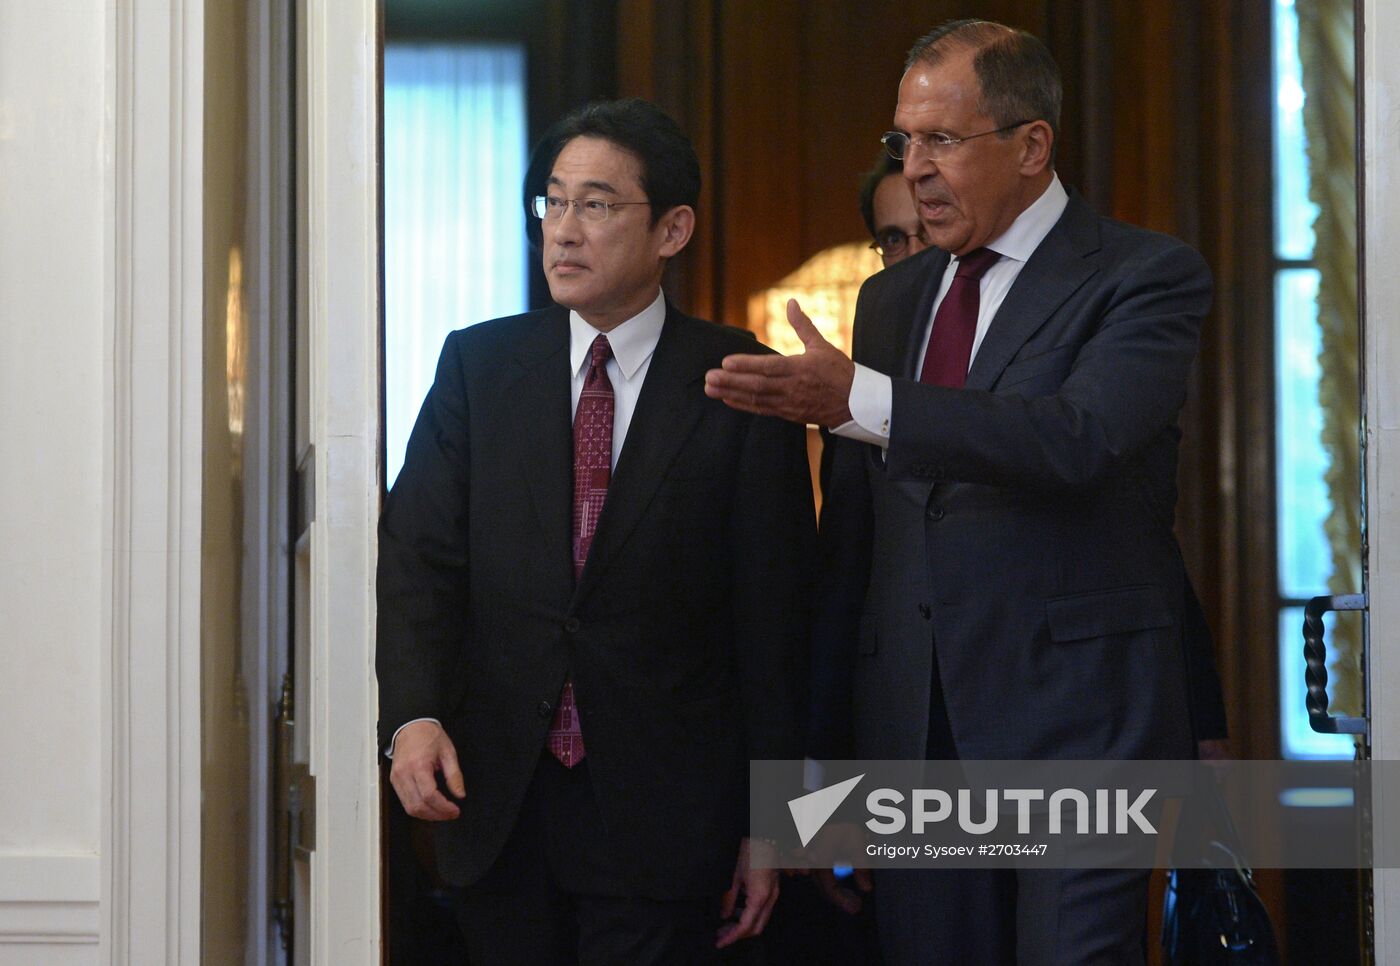 Russian Foreign Minister Sergey Lavrov meets with his Japanese counterpart Fumio Kishida